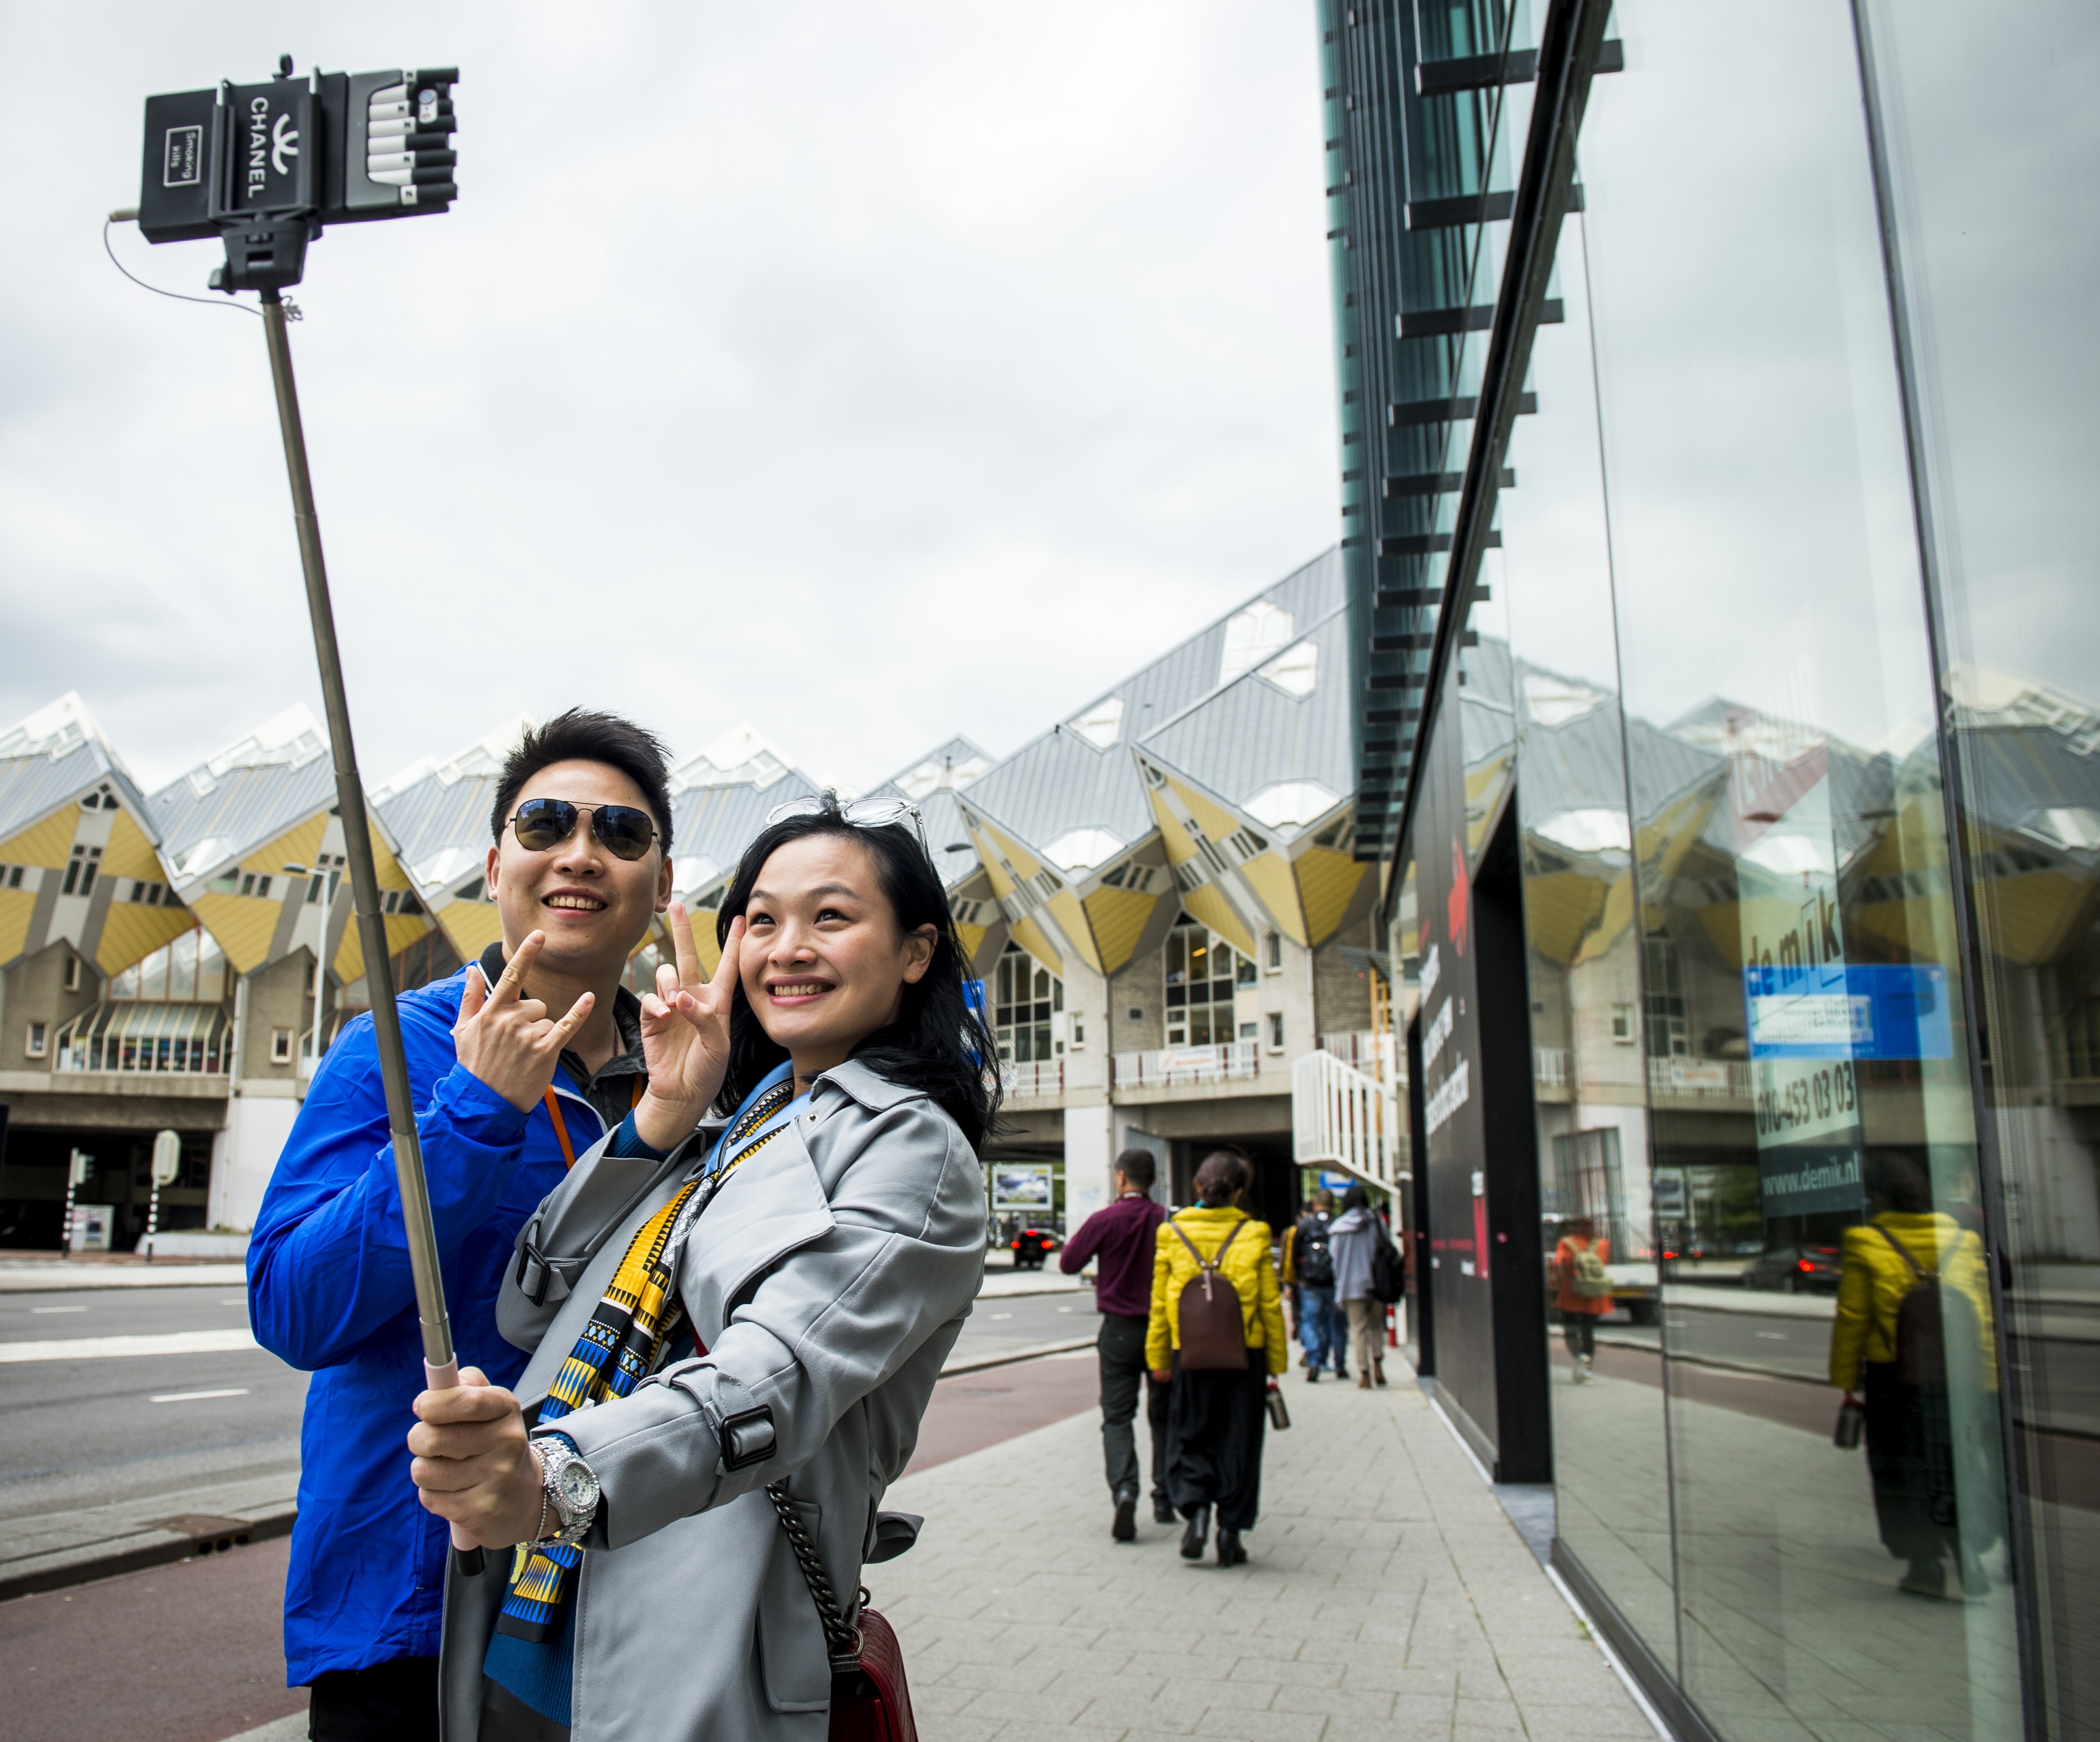 In 2018, Chinese travellers made 140 million outbound trips, a rise of 13.5 per cent from 2017, according to the China Tourism Academy. A Chinese couple earns social media bragging rights with a visit to Rotterdam, Netherlands, on May 25, 2015. Photo: AFP